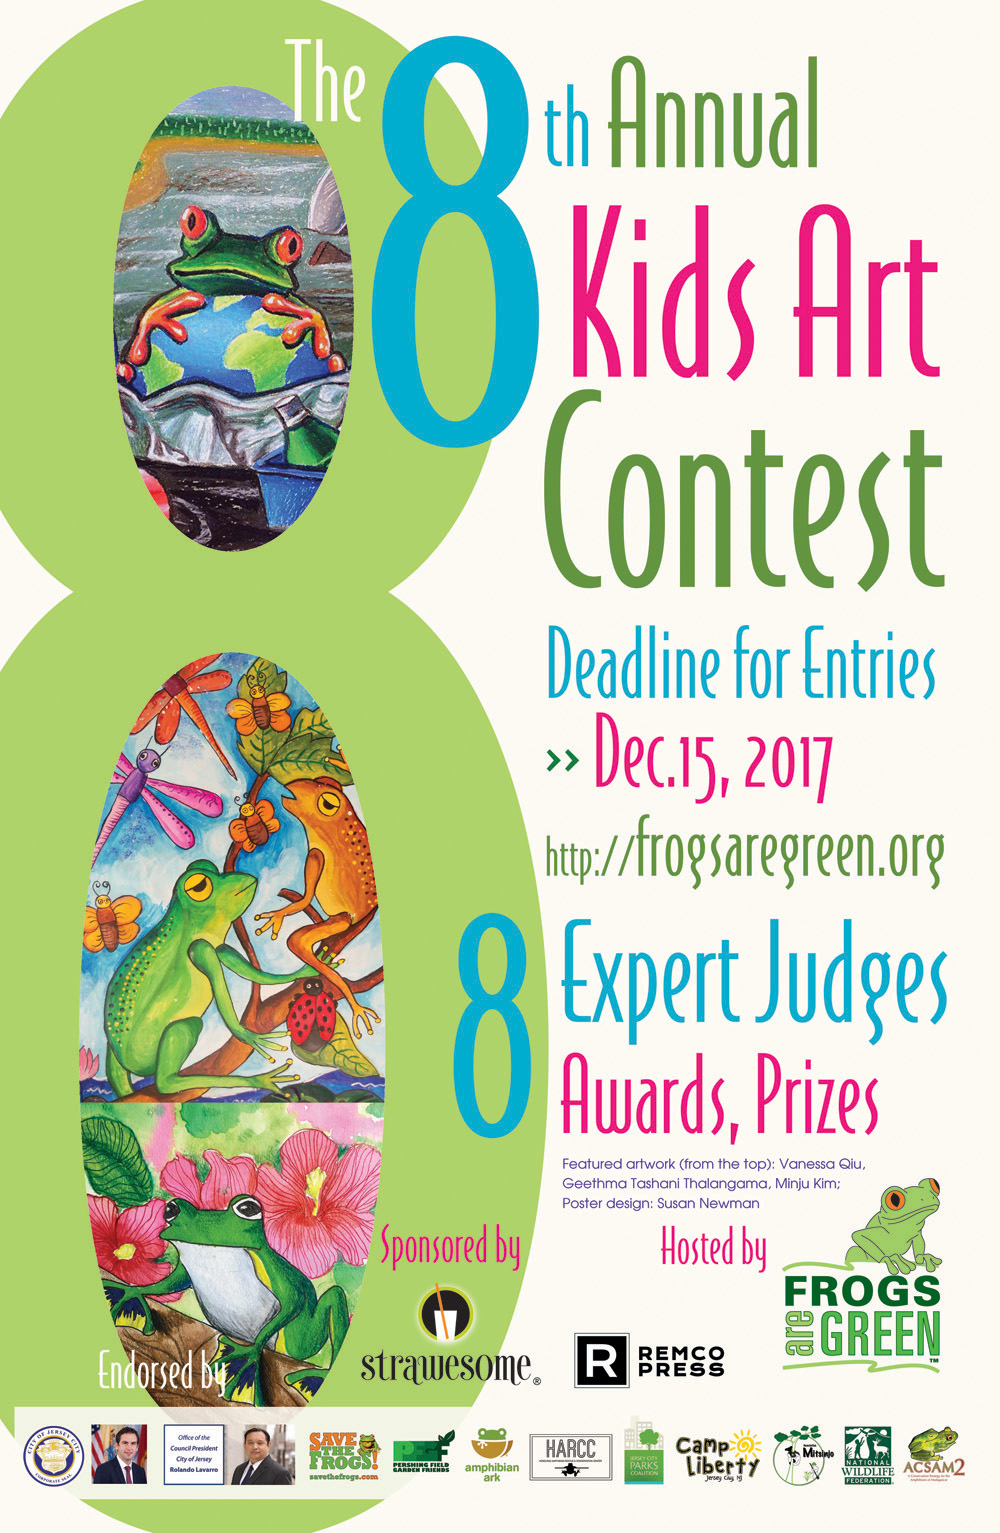 2017 kids art contest hosted by Frogs Are Green. Design by Susan Newman.